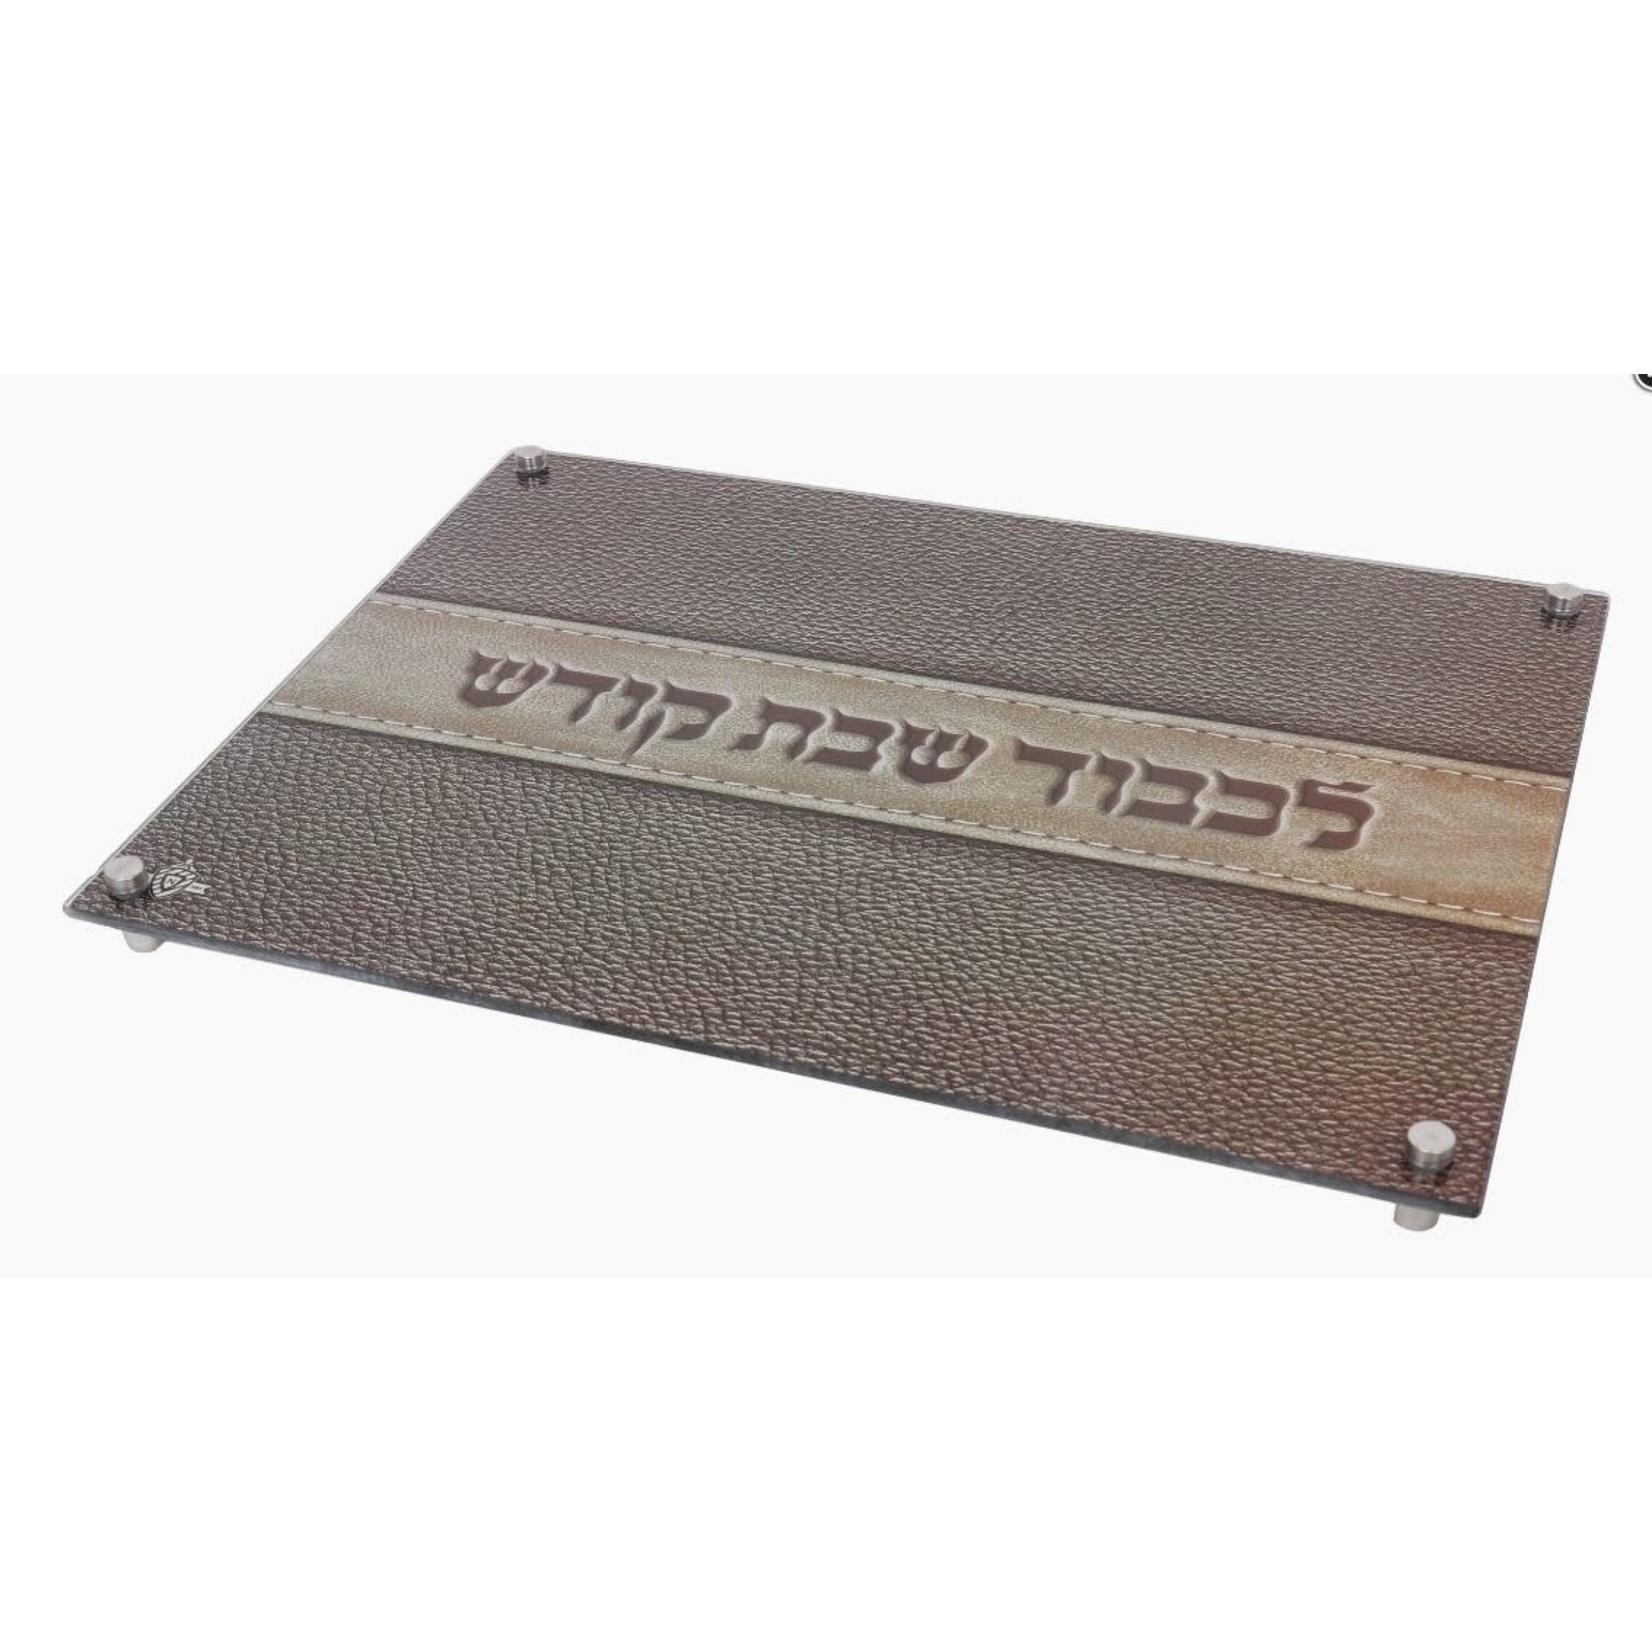 TWS 58298 Glass Challah Board gray leather style with Stand Offs  12x16"